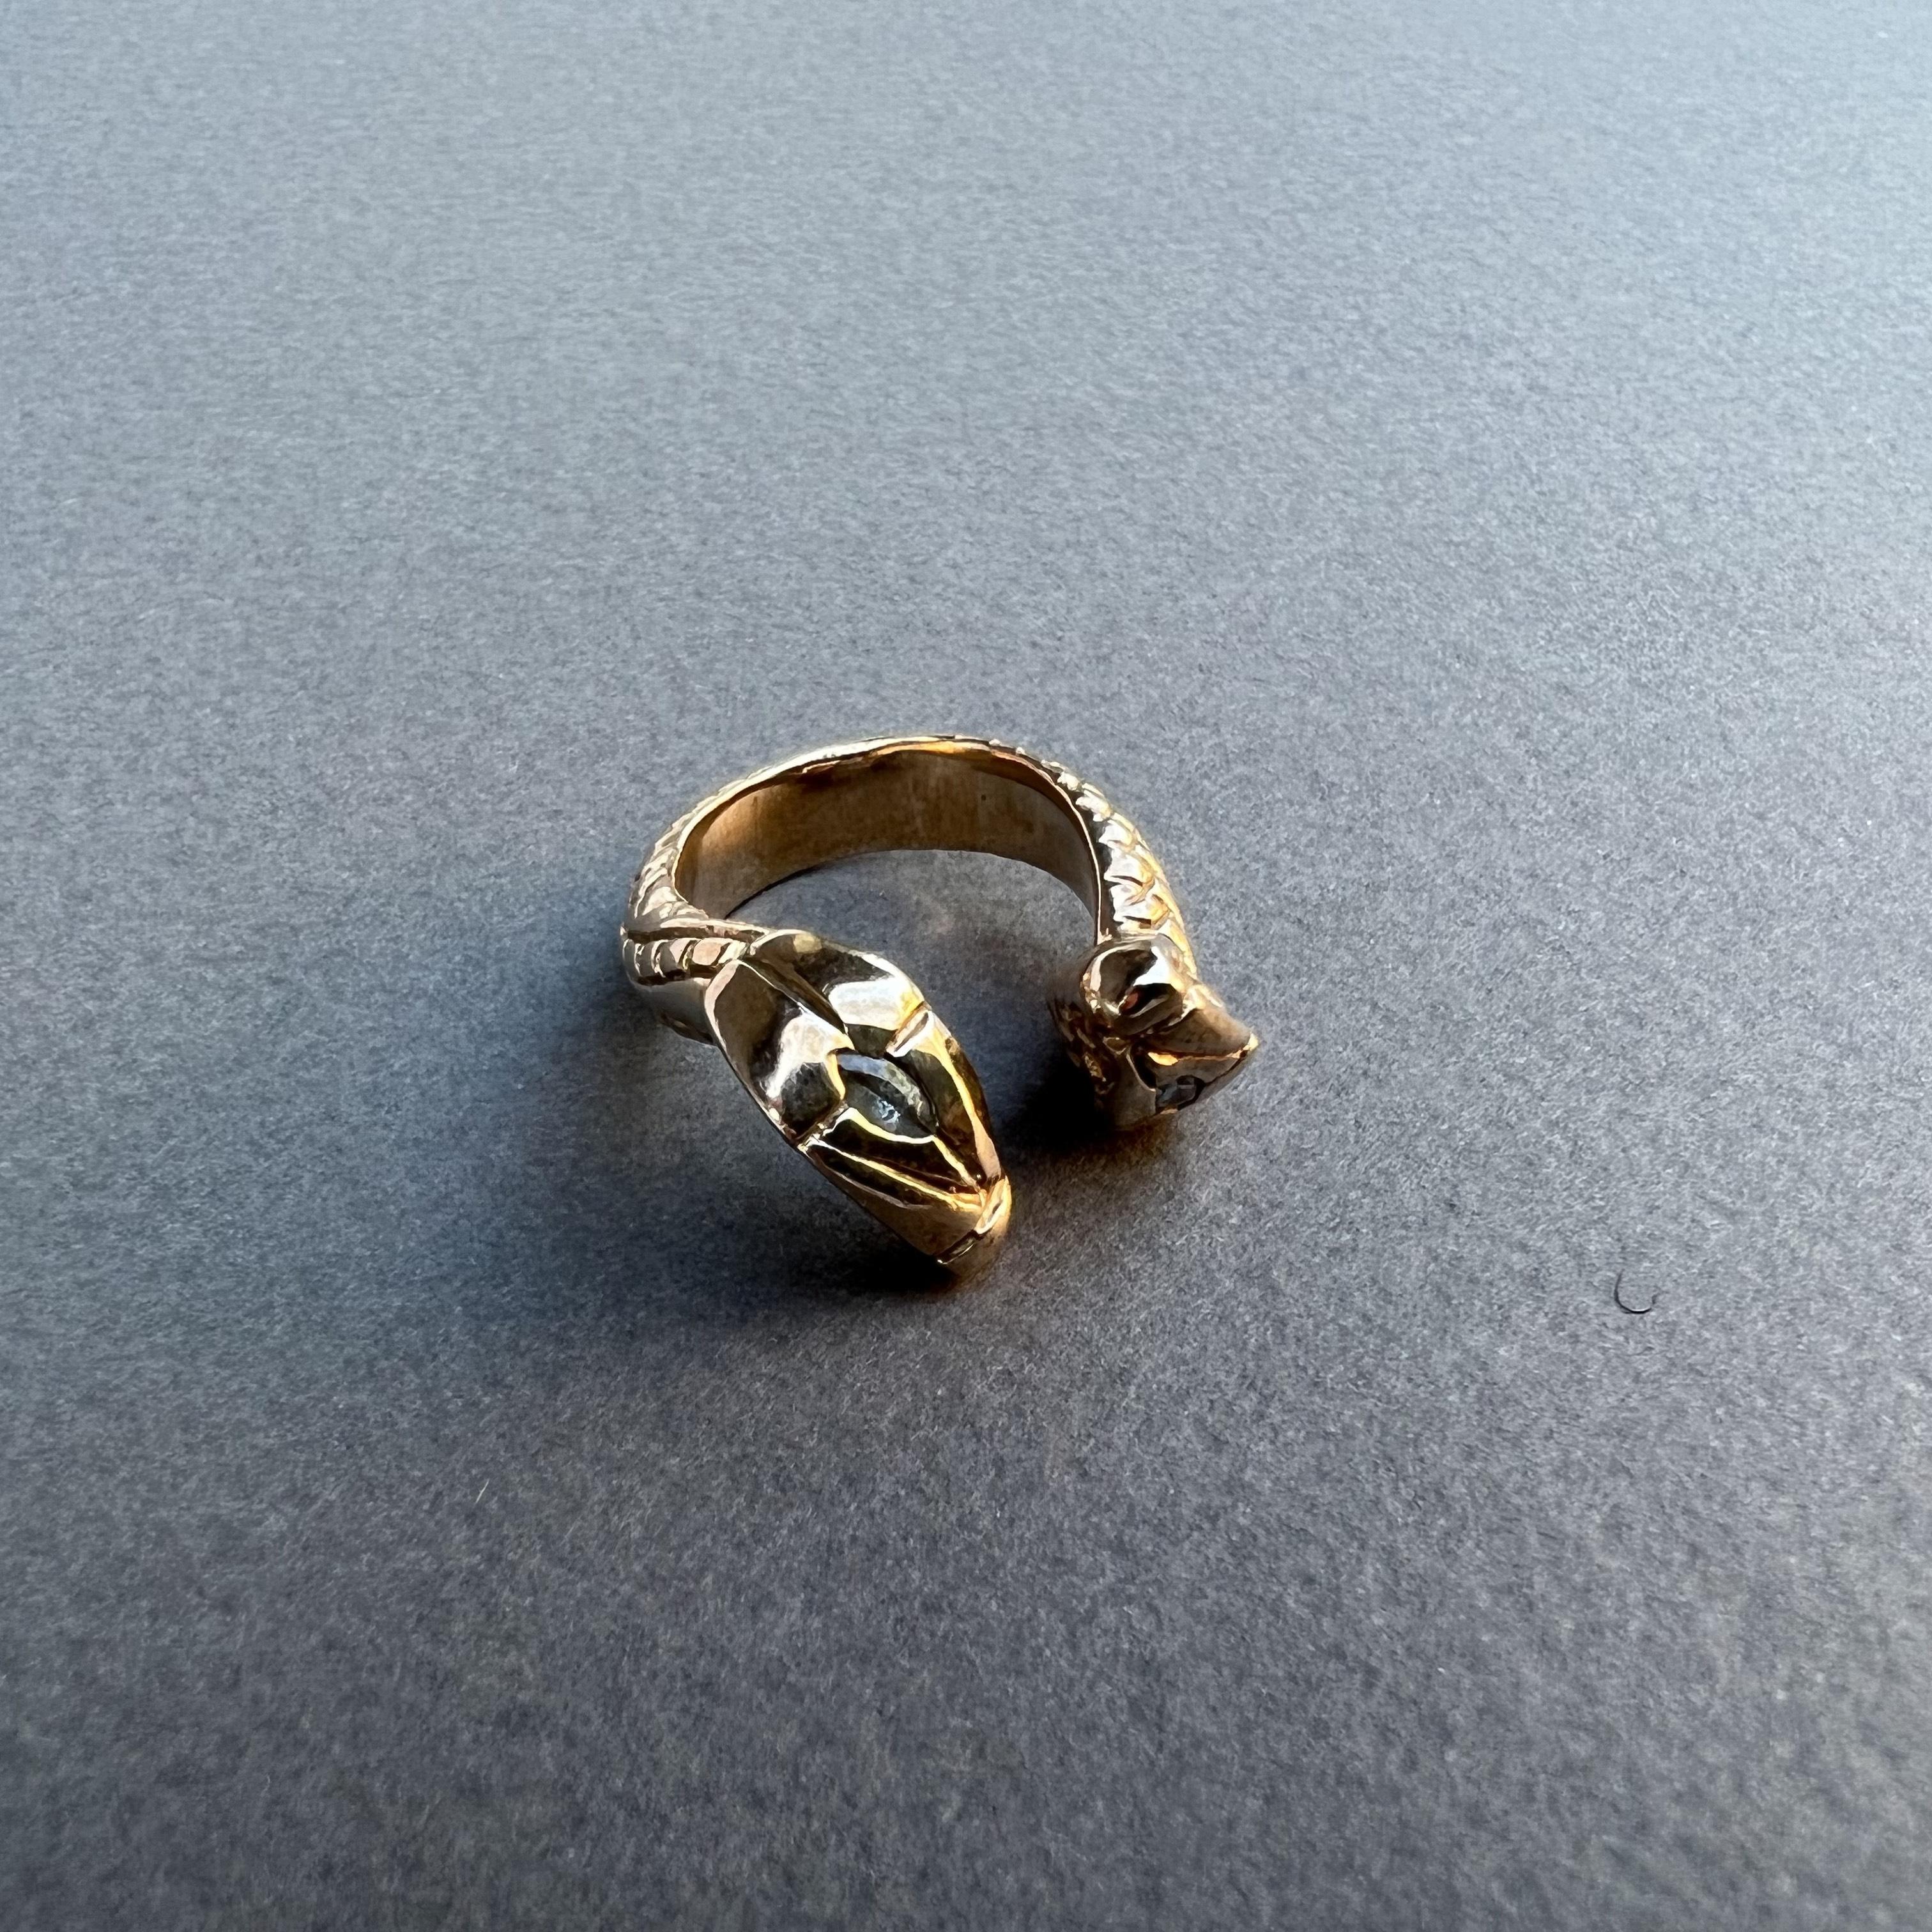 Aquamarine Double Snake Head Ring Cocktail Bronze Adjustable J Dauphin For Sale 3